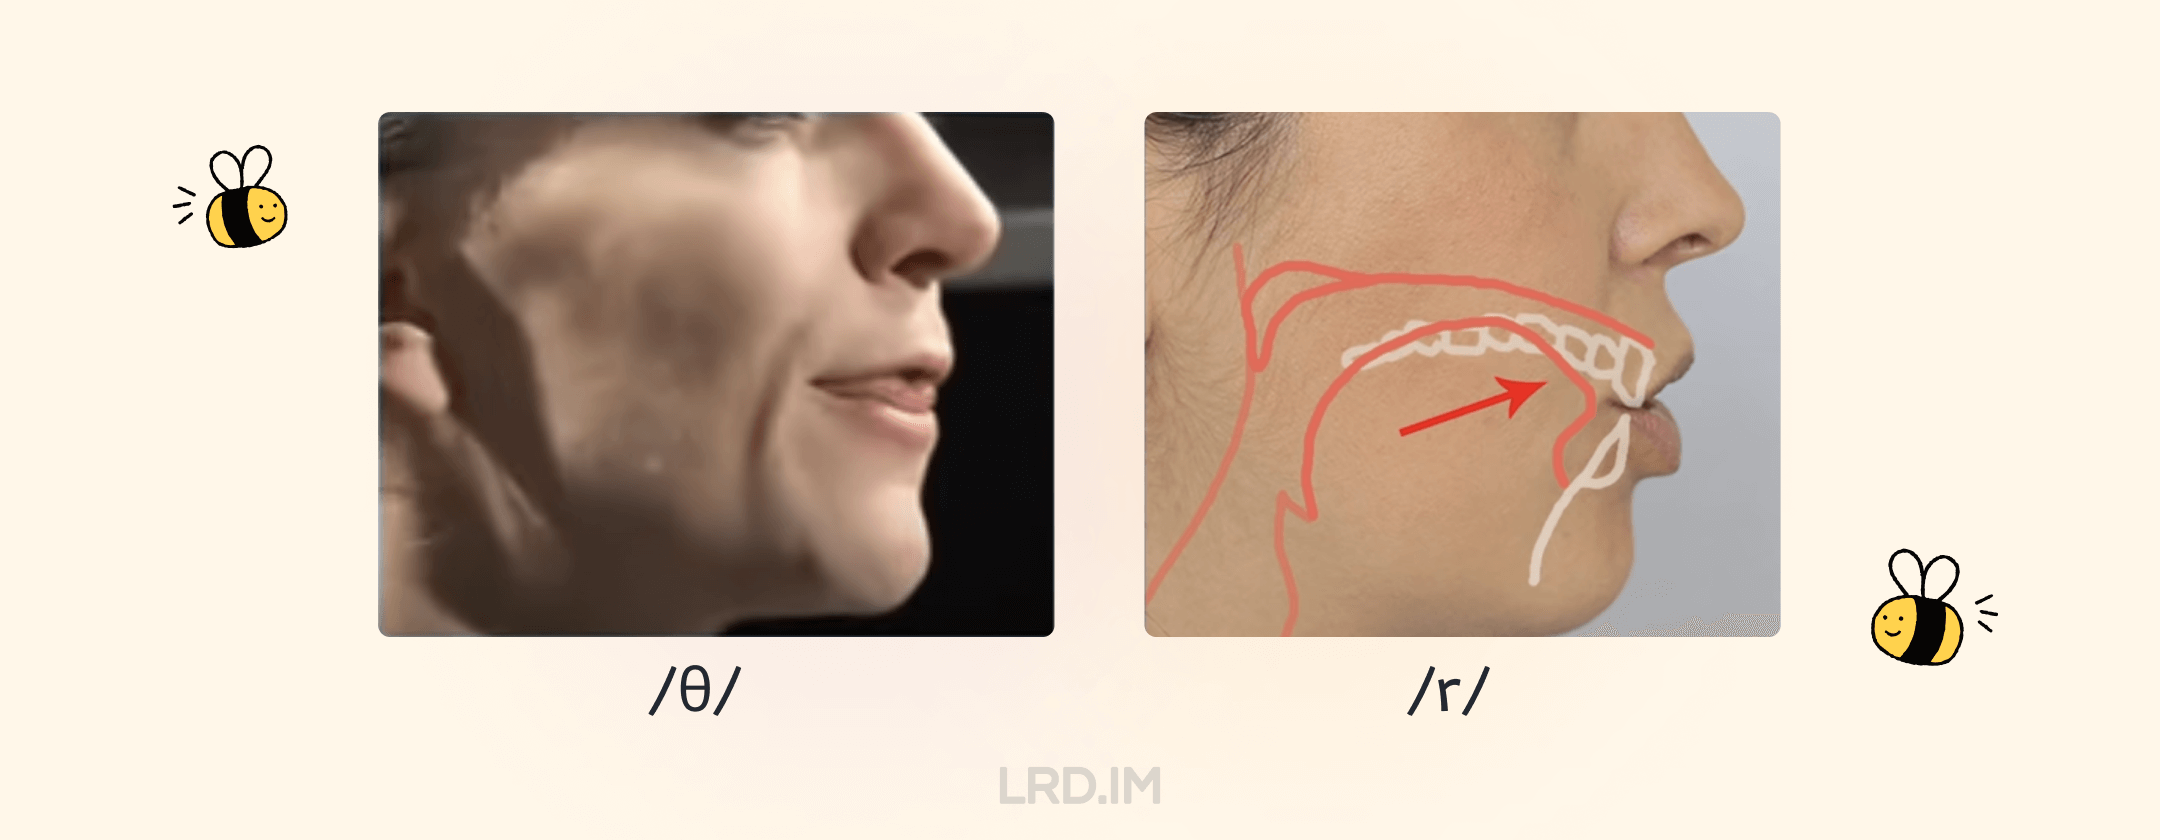 Tongue Position of /θ/ and /r/